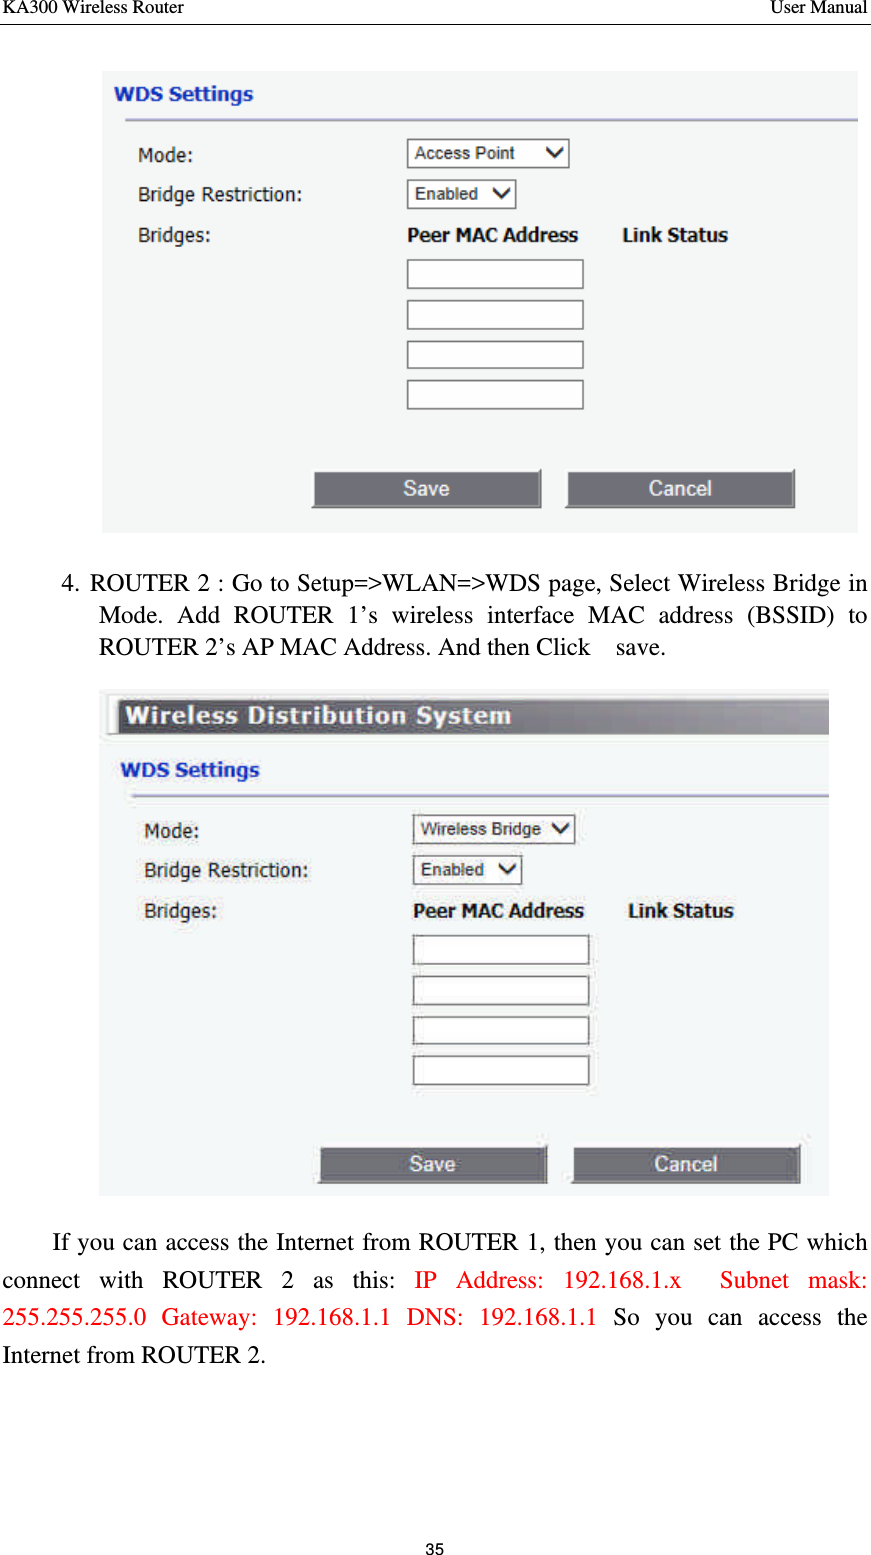 KA300 Wireless Router       User Manual 35   4. ROUTER 2 : Go to Setup=&gt;WLAN=&gt;WDS page, Select Wireless Bridge in Mode. Add ROUTER 1’s wireless interface MAC address (BSSID) to ROUTER 2’s AP MAC Address. And then Click  save.      If you can access the Internet from ROUTER 1, then you can set the PC which connect with ROUTER 2 as this: IP Address: 192.168.1.x    Subnet mask: 255.255.255.0 Gateway: 192.168.1.1 DNS: 192.168.1.1 So you can access the Internet from ROUTER 2.     